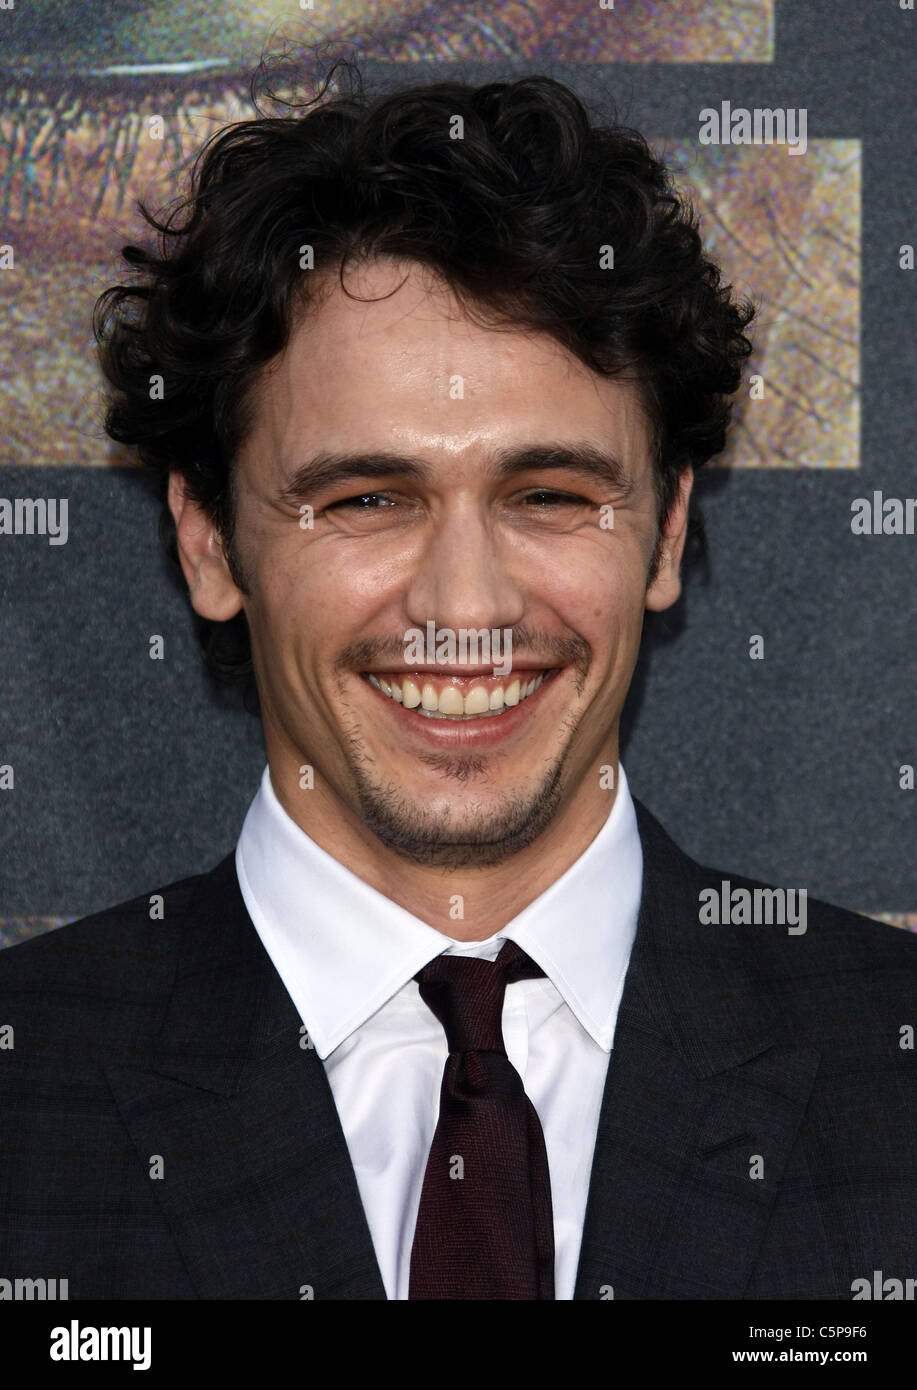 JAMES FRANCO RISE OF THE PLANET OF THE APES. LOS ANGELES PREMIERE HOLLYWOOD LOS ANGELES CALIFORNIA USA 28 July 2011 Stock Photo